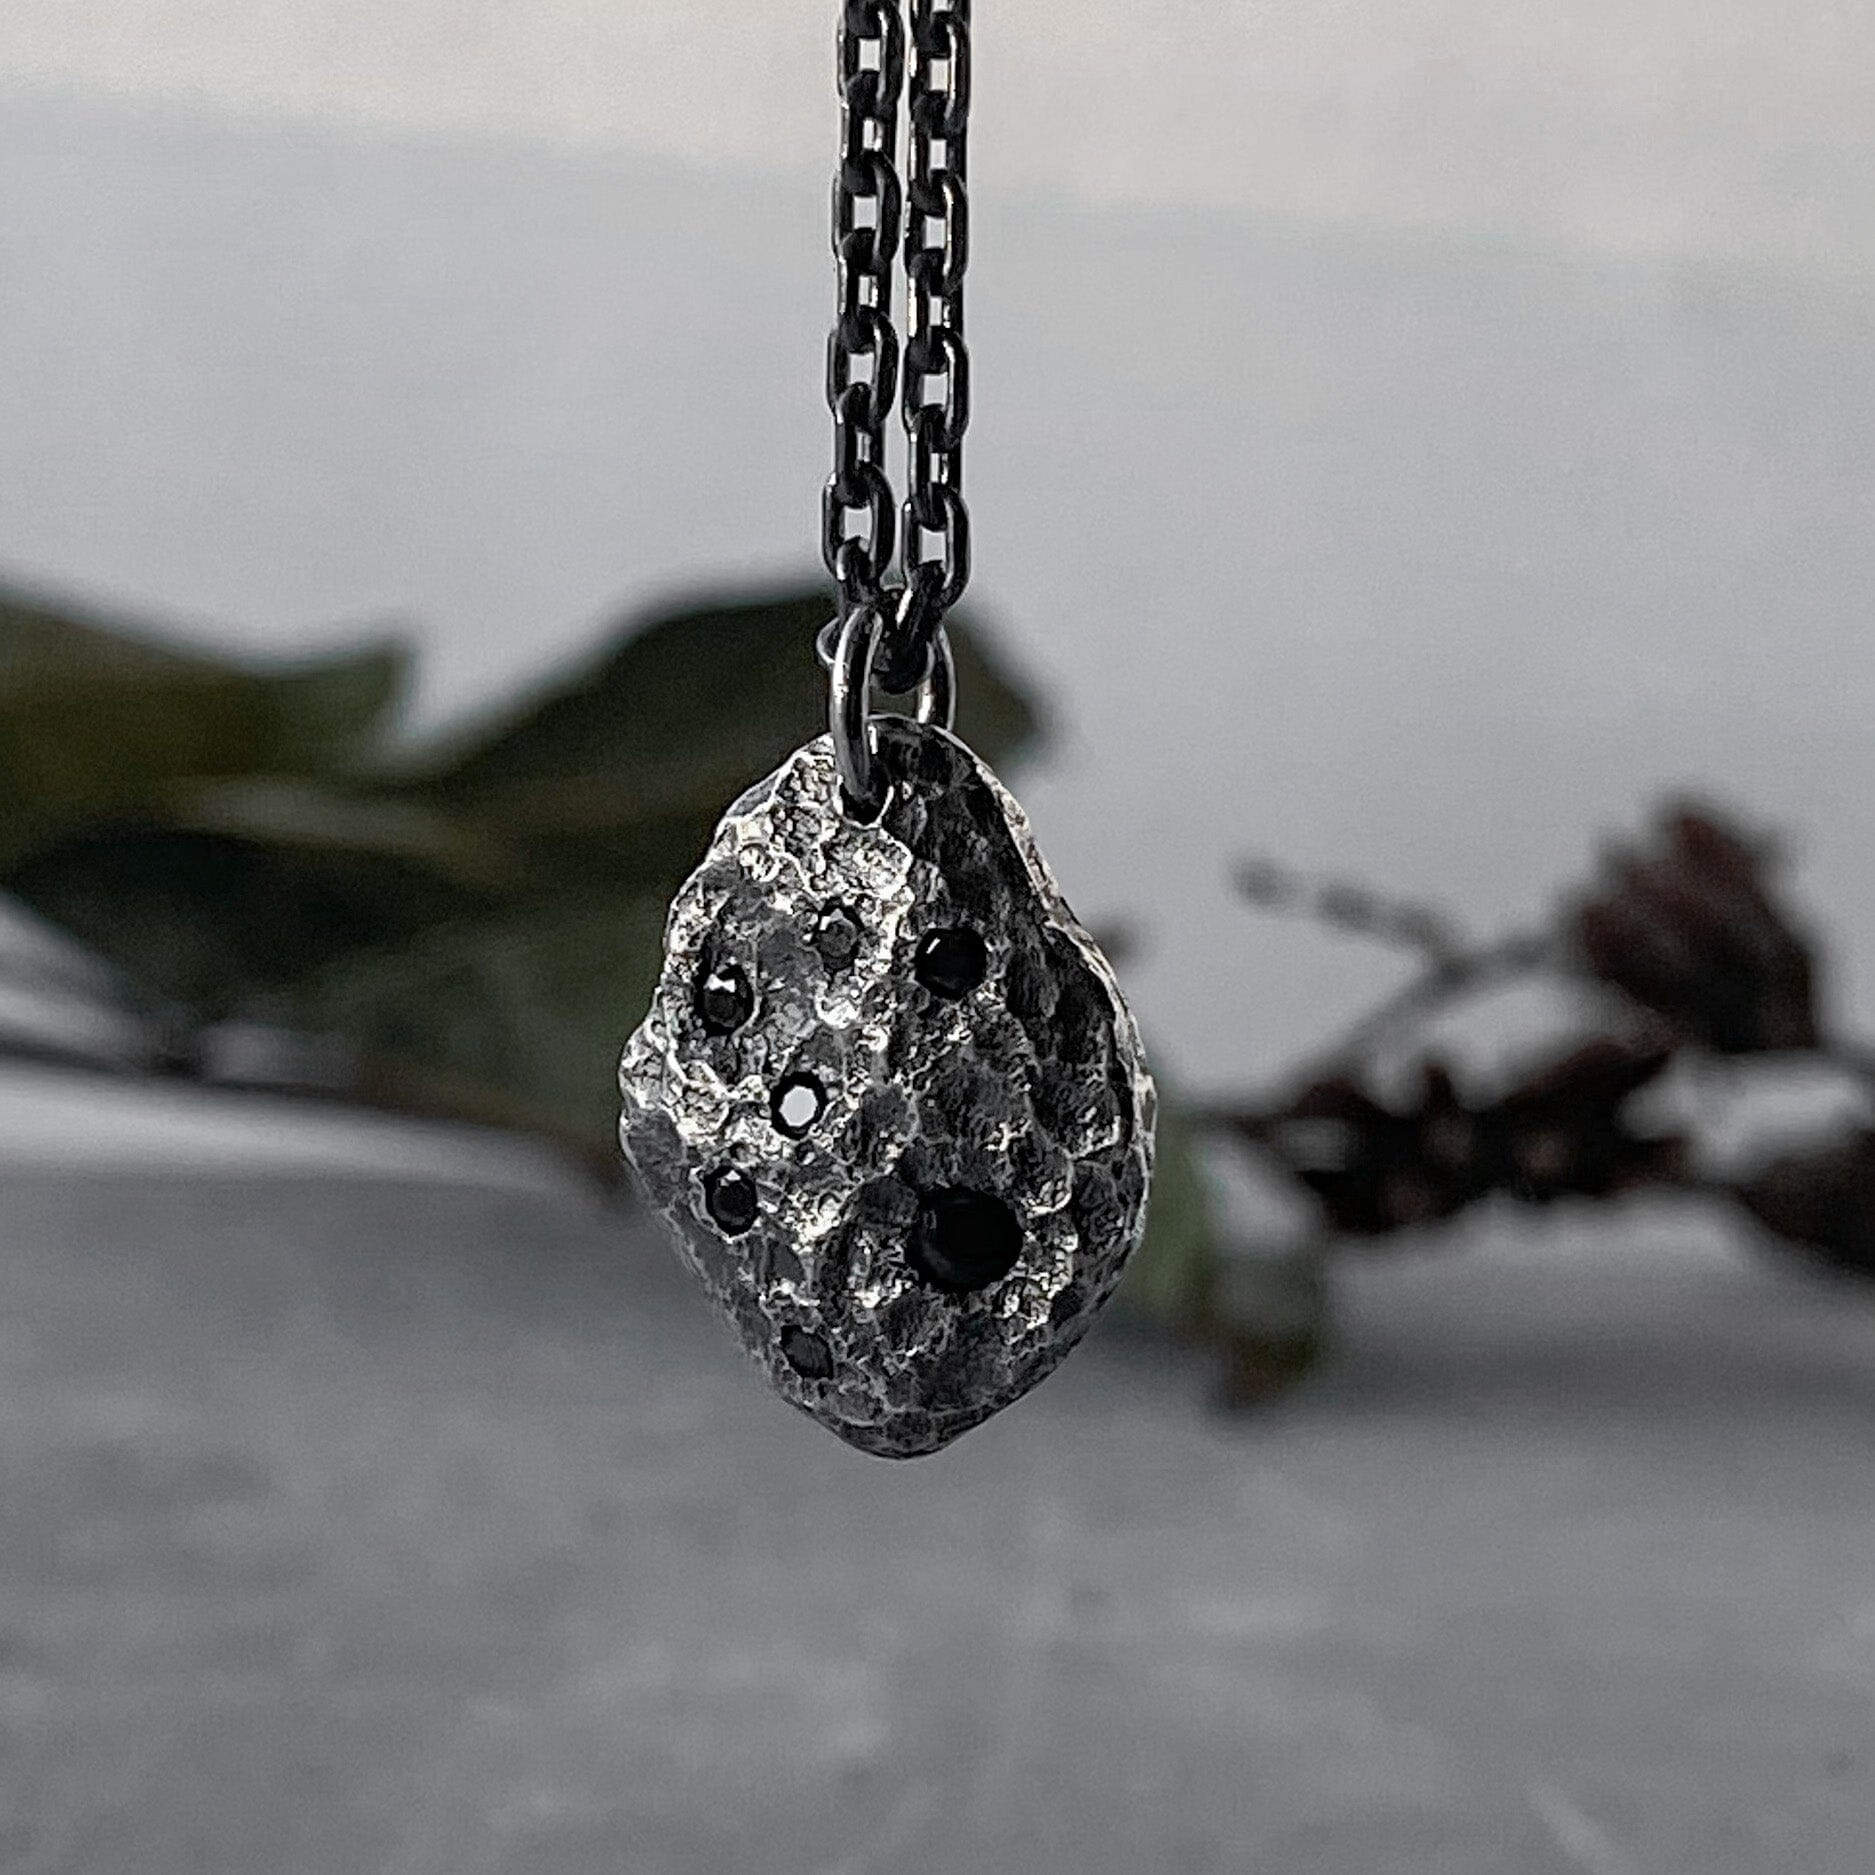 Meteor pendant with seven black diamonds and chain Charms & Pendants Project50g 